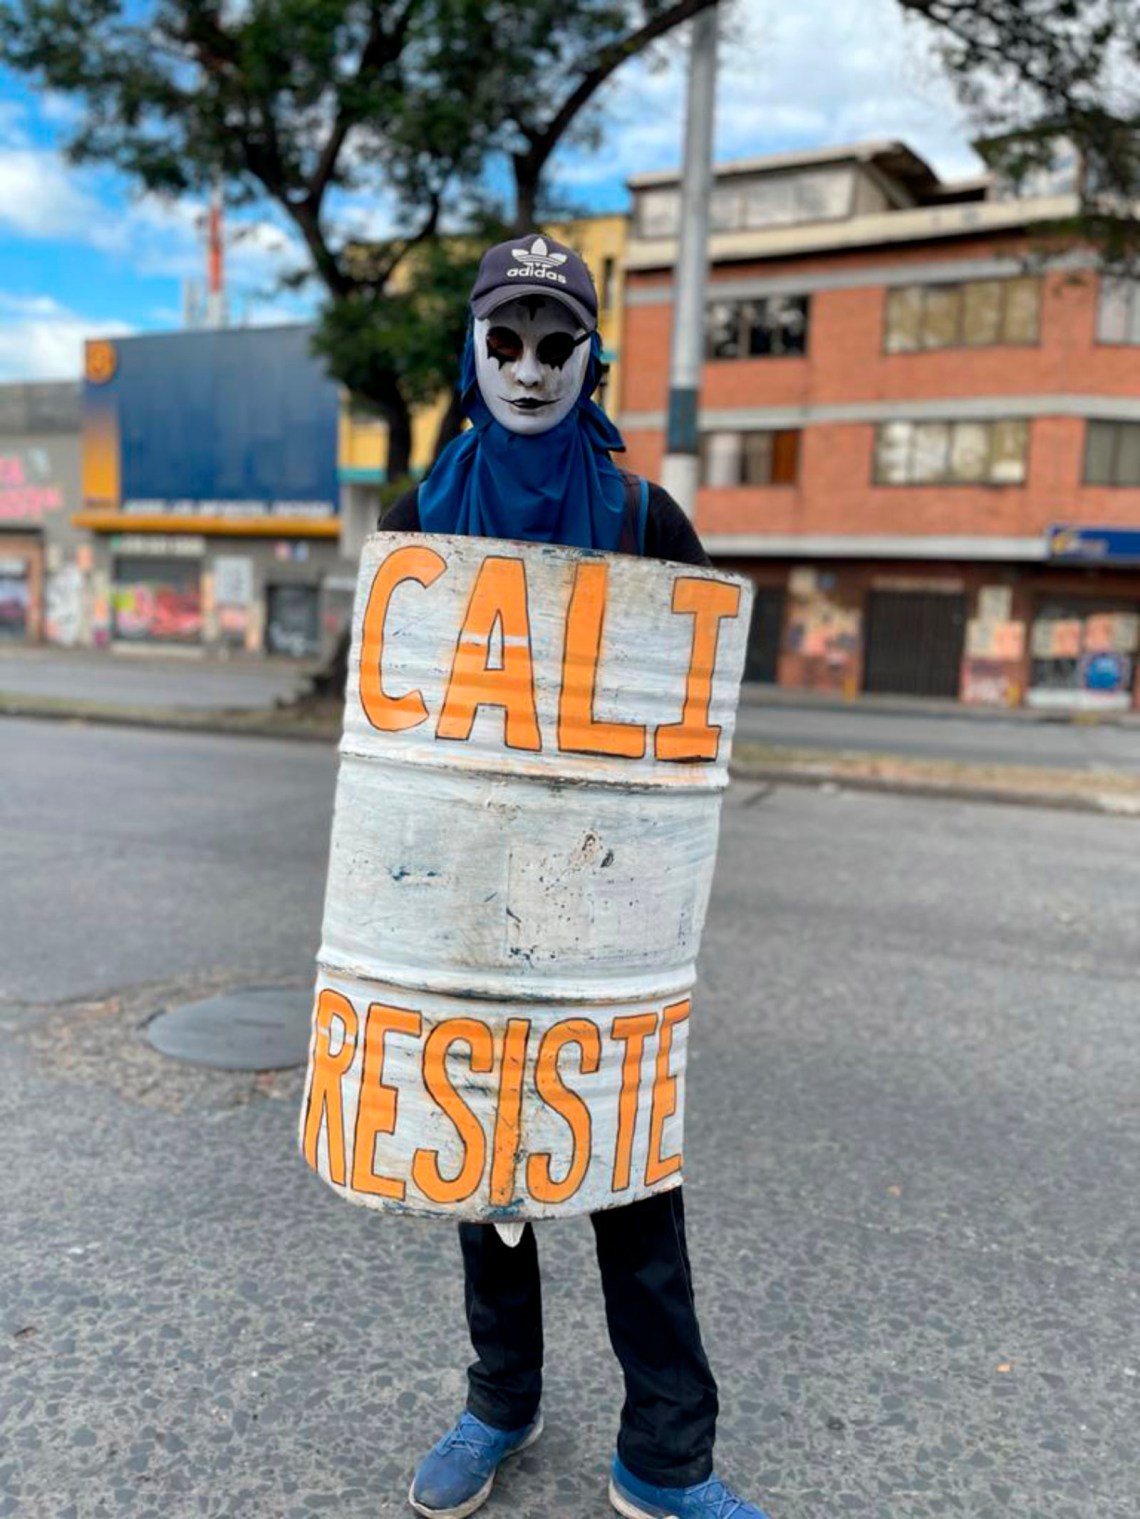 A demonstrator during antigovernment protests, Cali, Colombia, May 2021